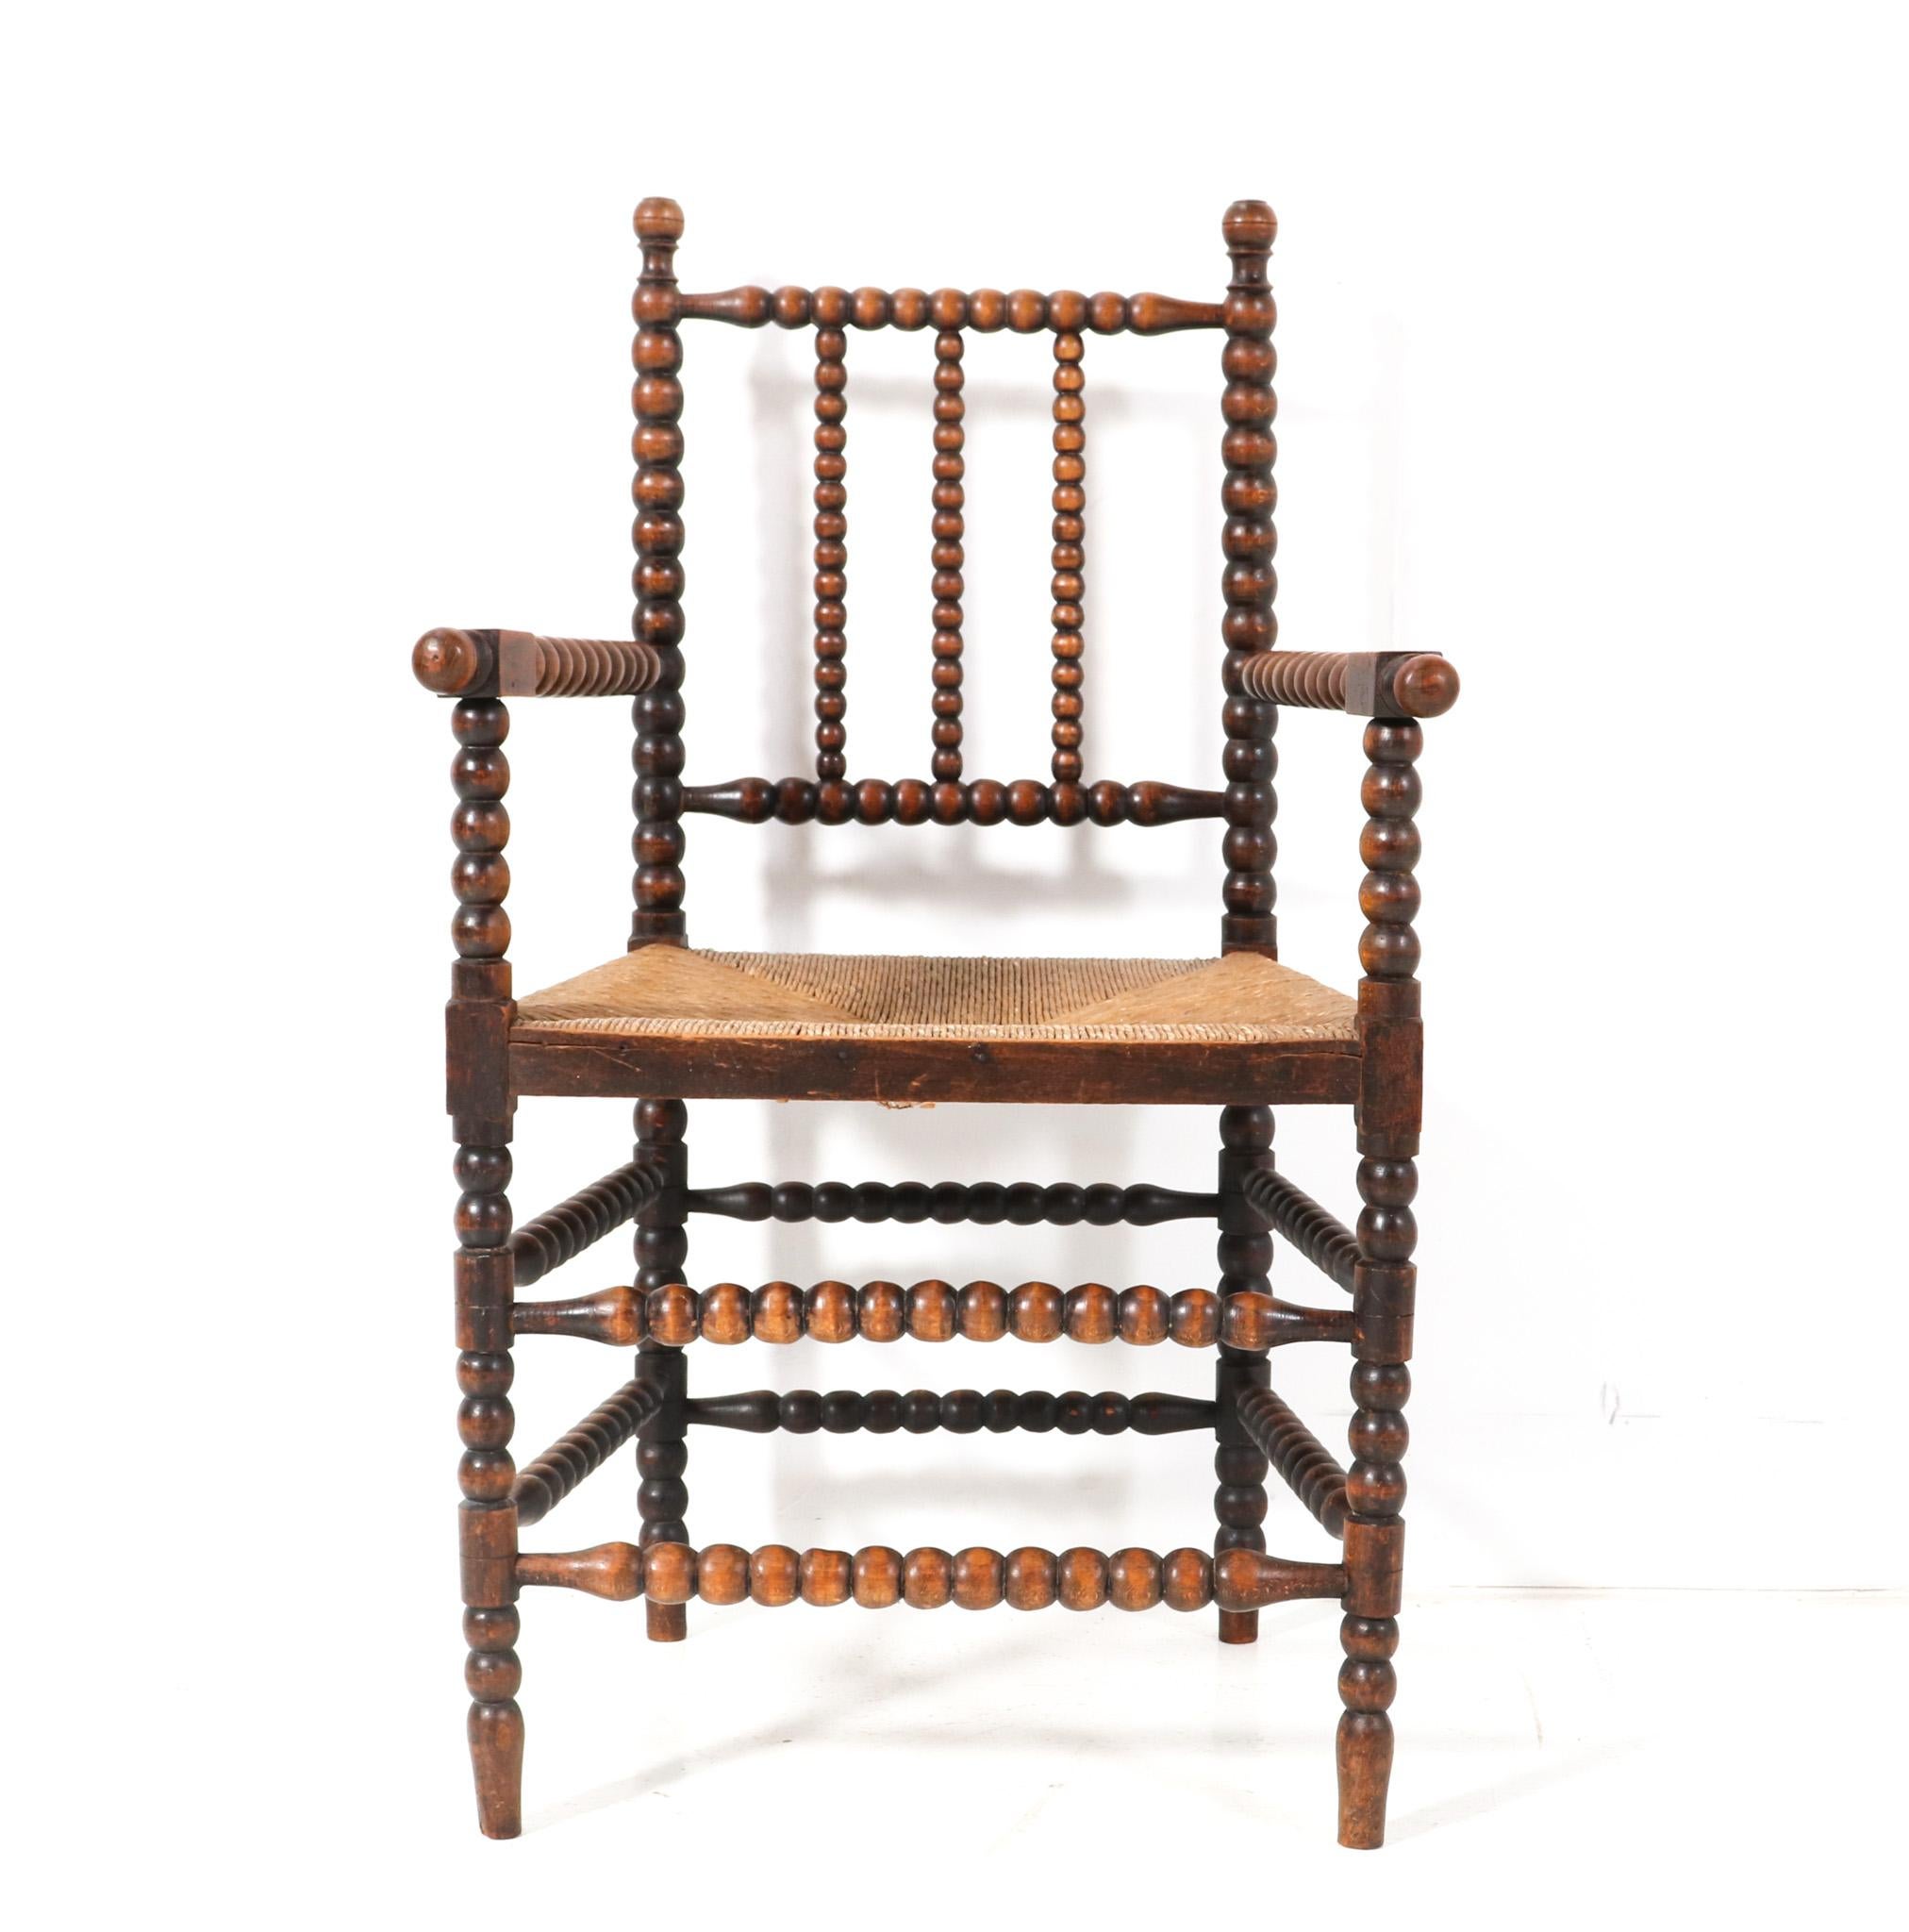 Stunning and rare Jacobean style bobbin armchair.
Striking Dutch design from the 1900s.
Solid handcrafted beech frame with bobbin turned back, legs and supports.
Original woven rush seat.
This wonderful Jacobean style bobbin armchair is in good